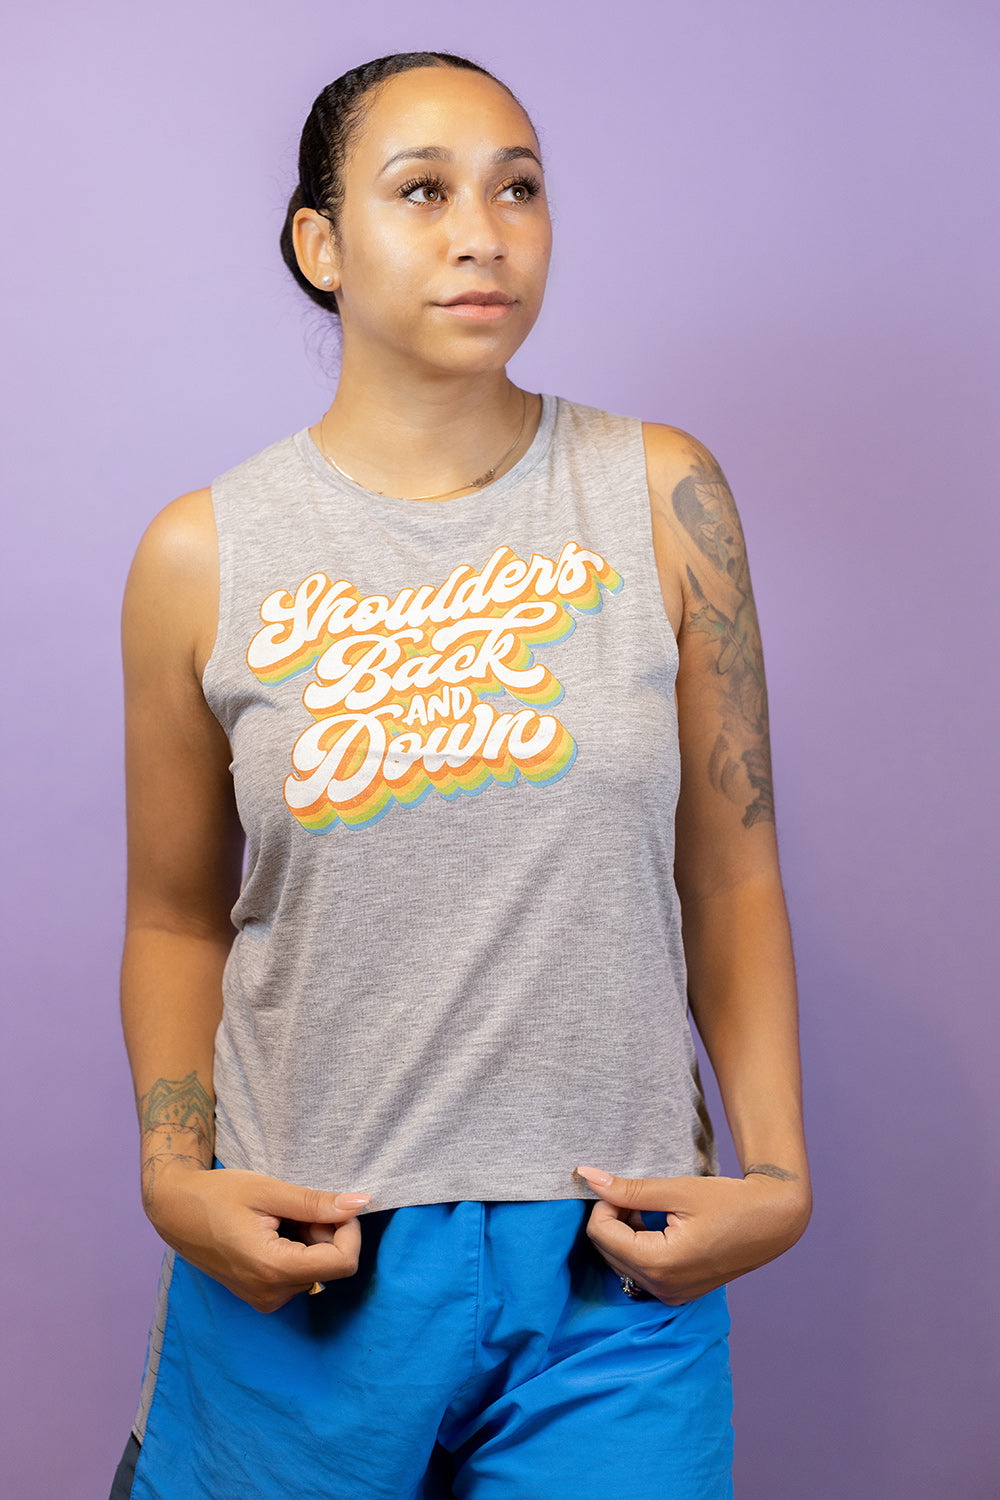 Woman wearing a grey muscle tank top that says "shoulders back and down" in multi color retro script